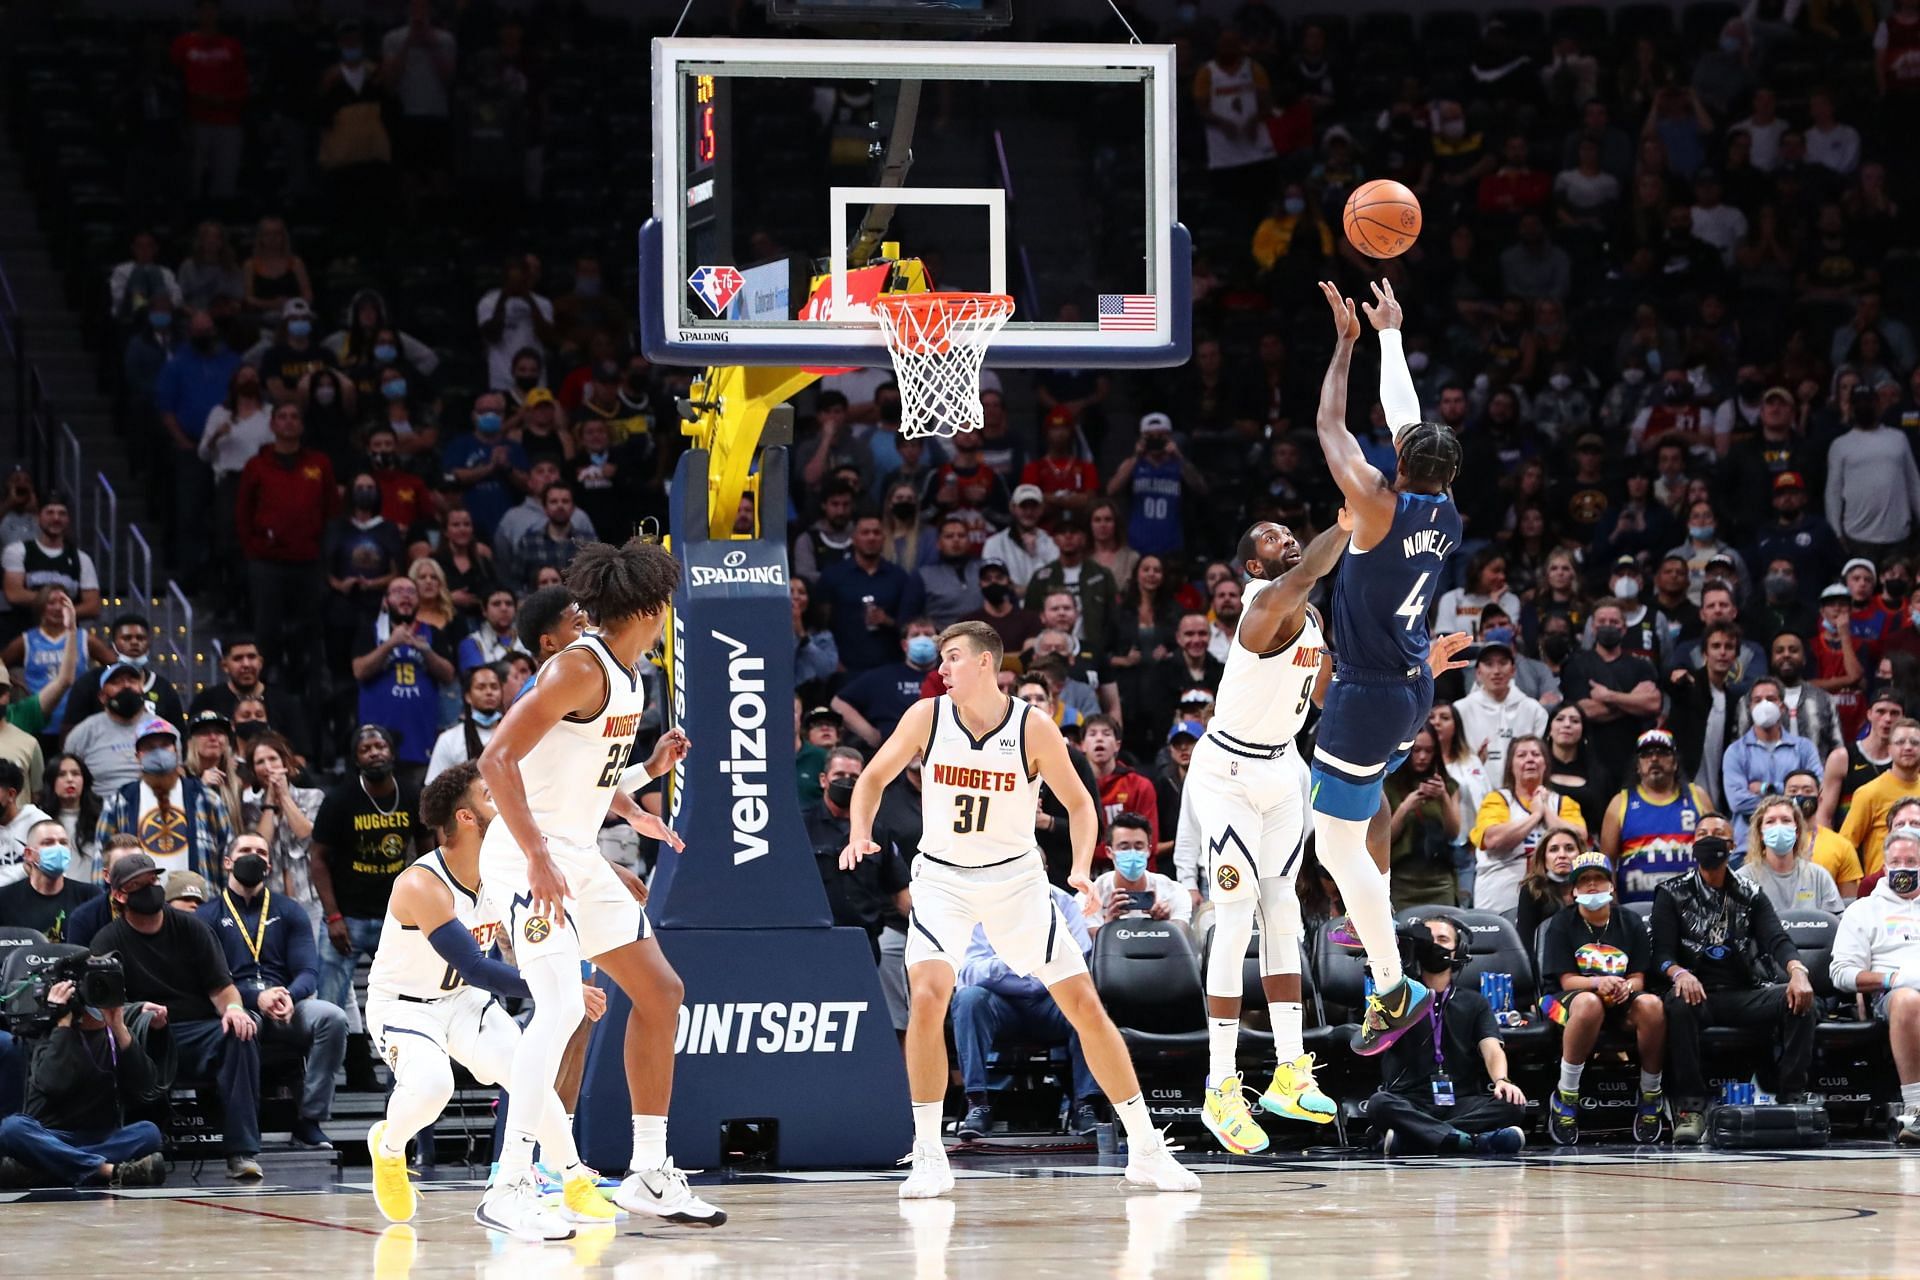 Minnesota Timberwolves will play the Denver Nuggets on Saturday.